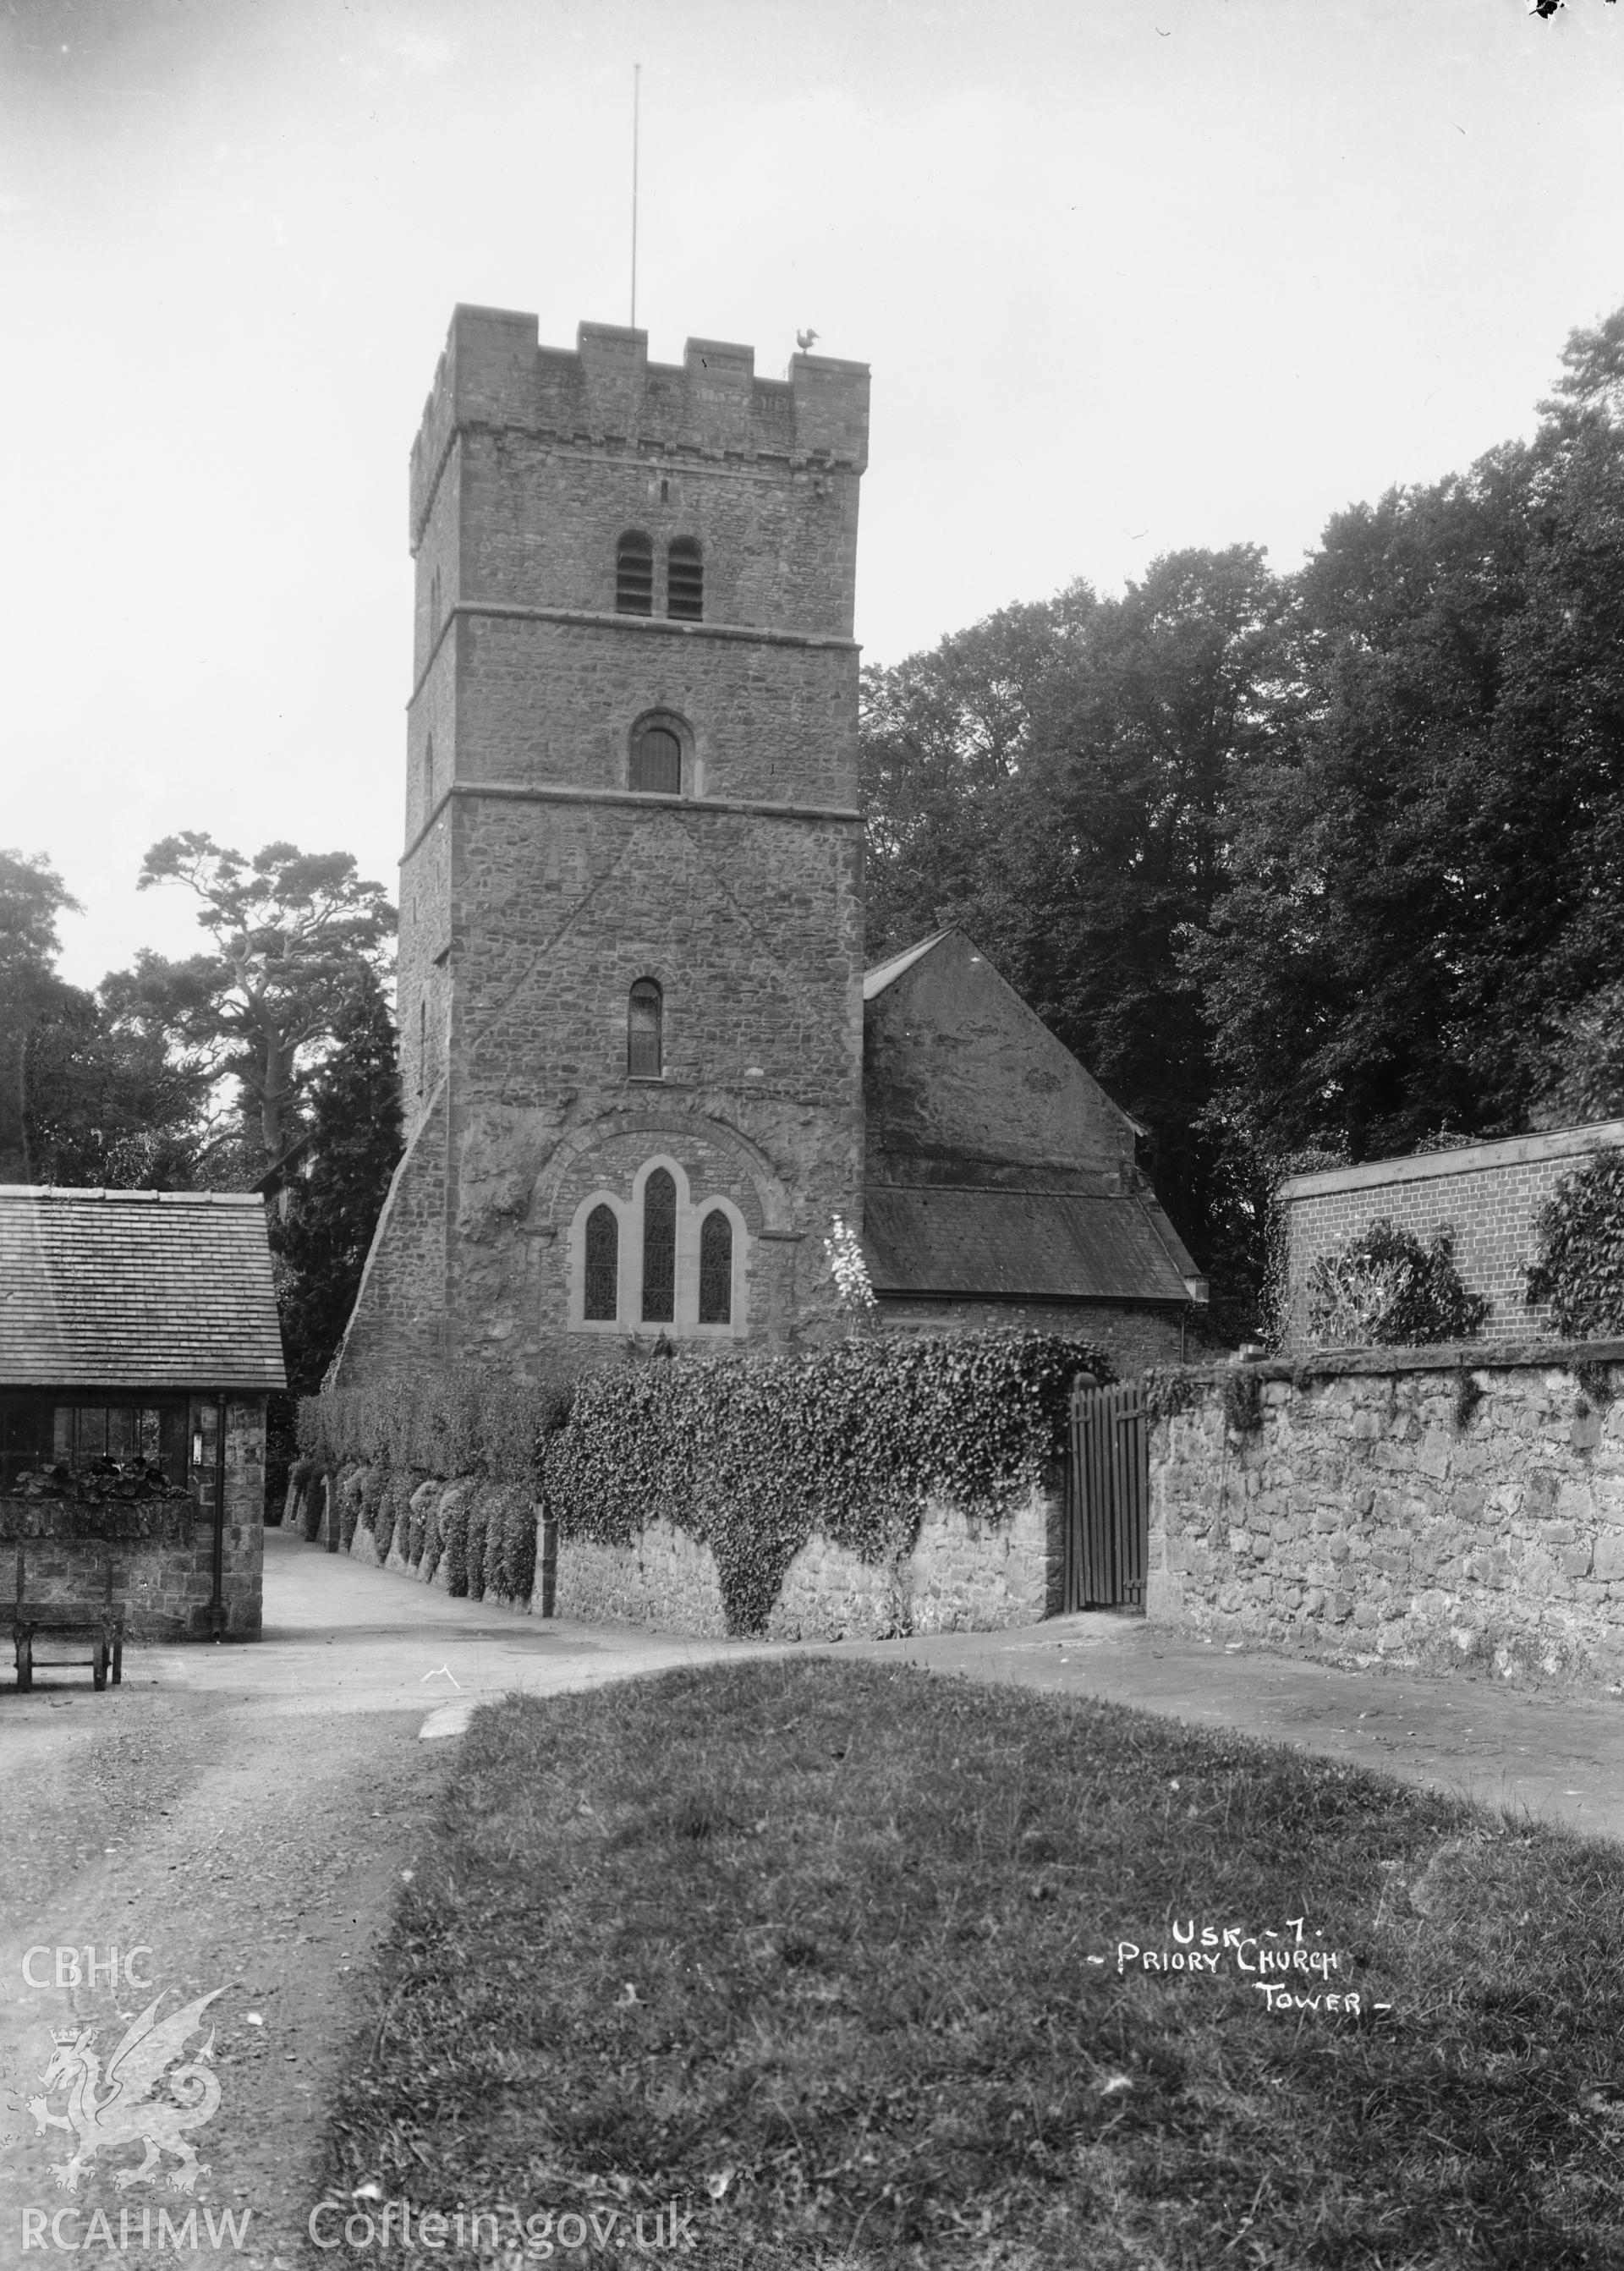 View of Priory Church tower at Usk.